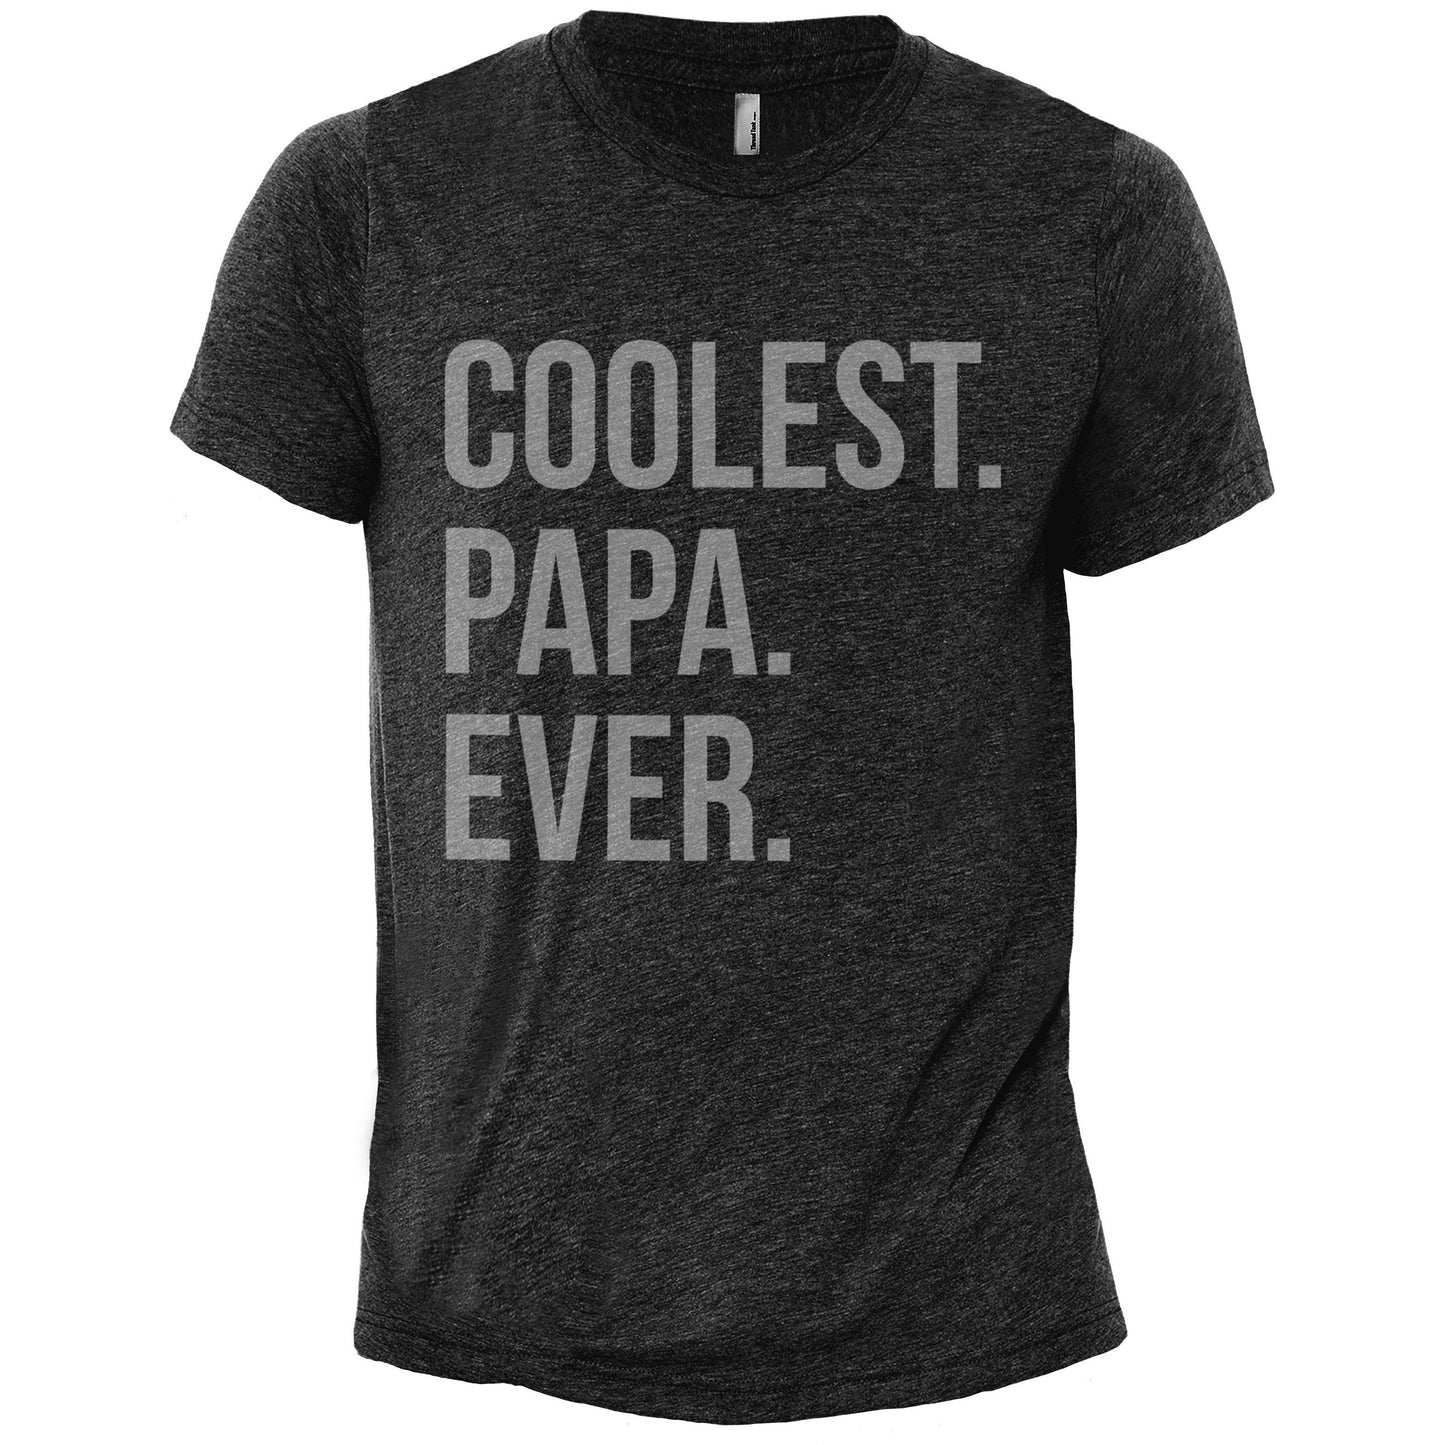 Coolest Papa Ever Charcoal Printed Graphic Men's Crew T-Shirt Tee